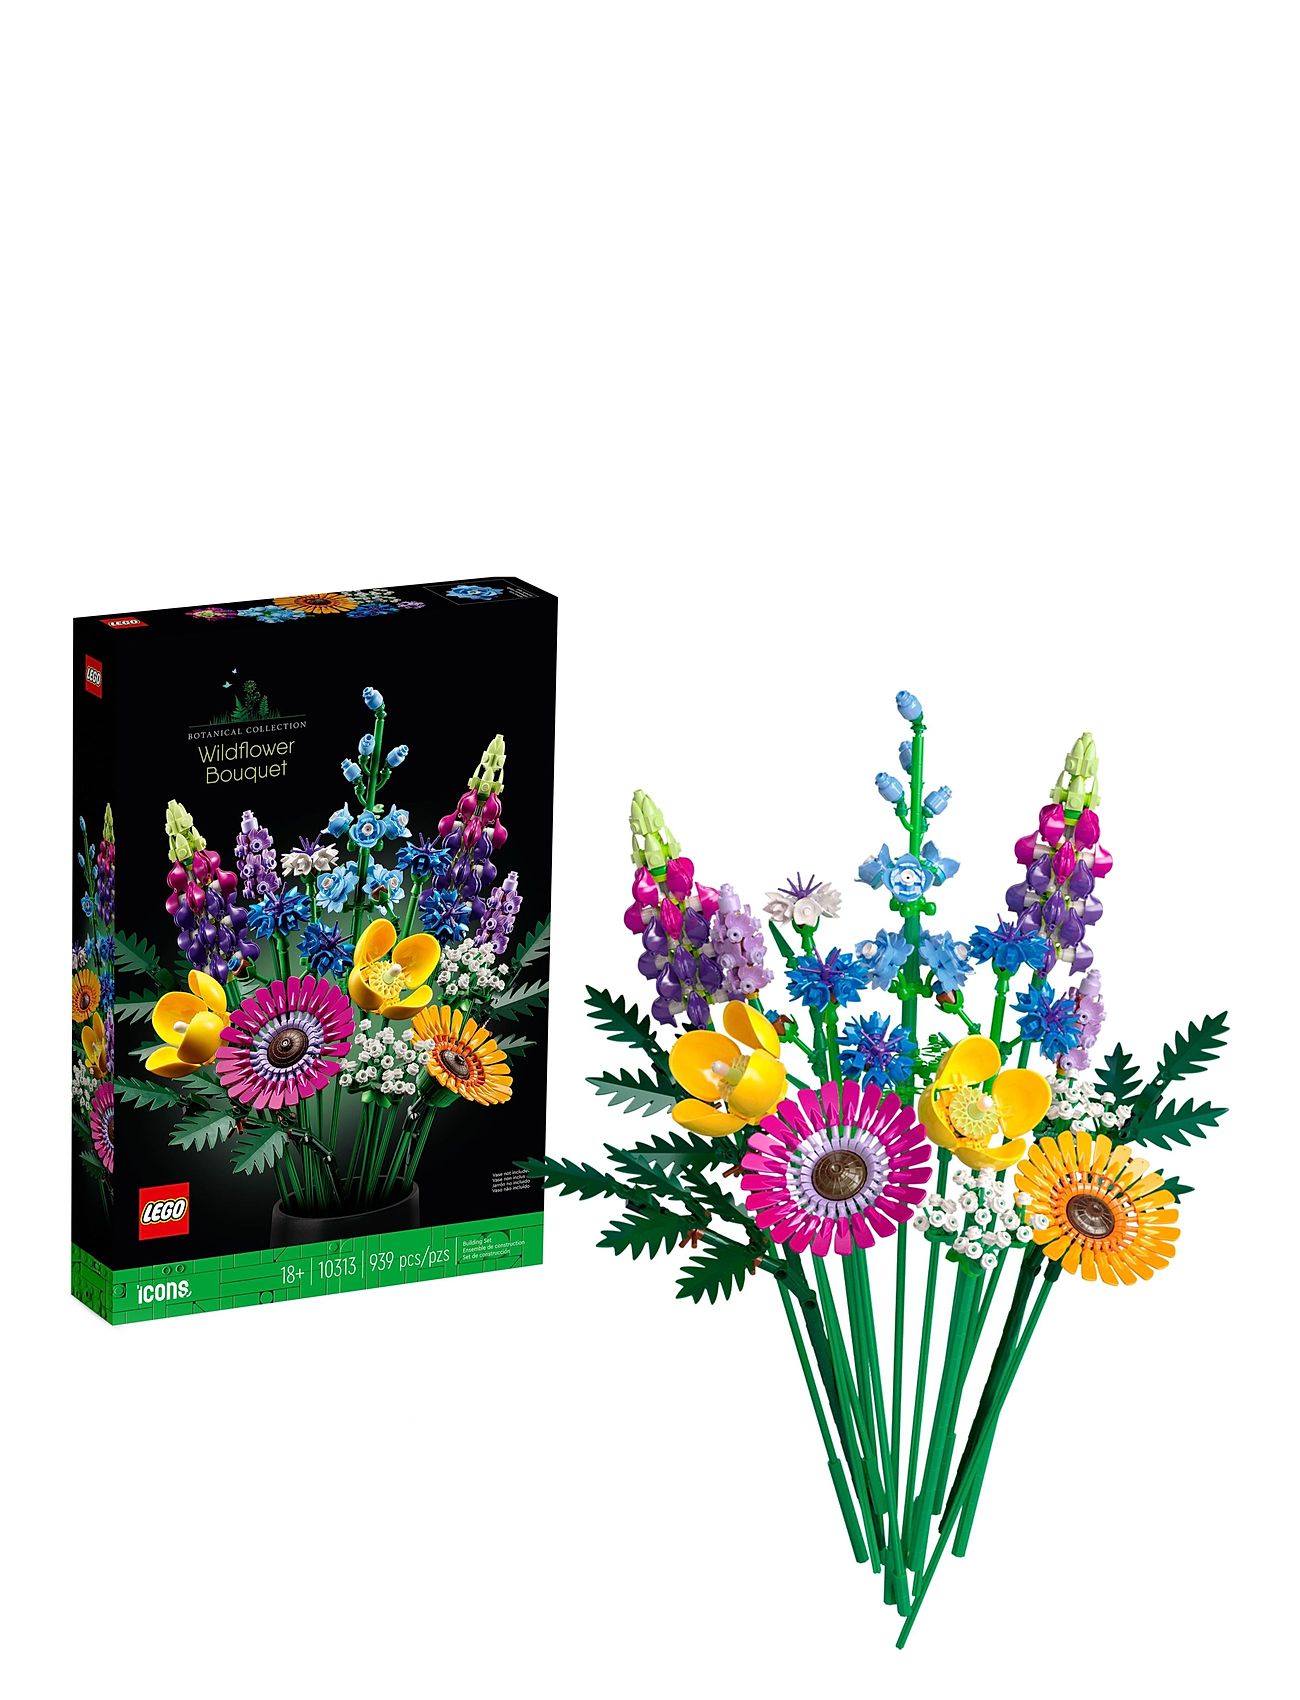 Wildflower Bouquet Flowers Set For Adults Toys Lego Toys Lego icons Multi/patterned LEGO